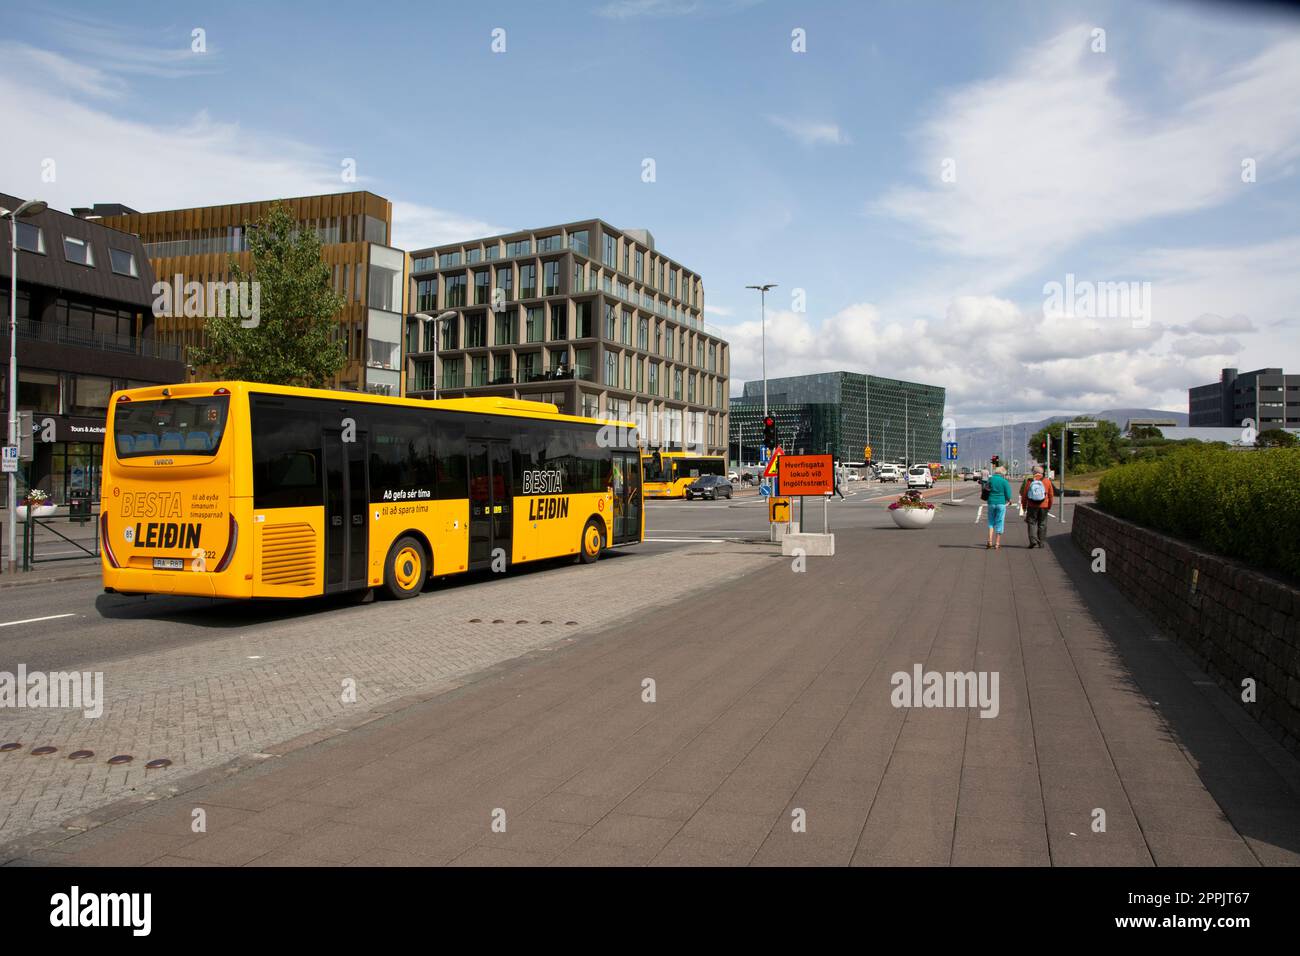 view on the Laekjargata, Harpa museum in background, yellow Besta Leidin public transport bus in foreground Stock Photo